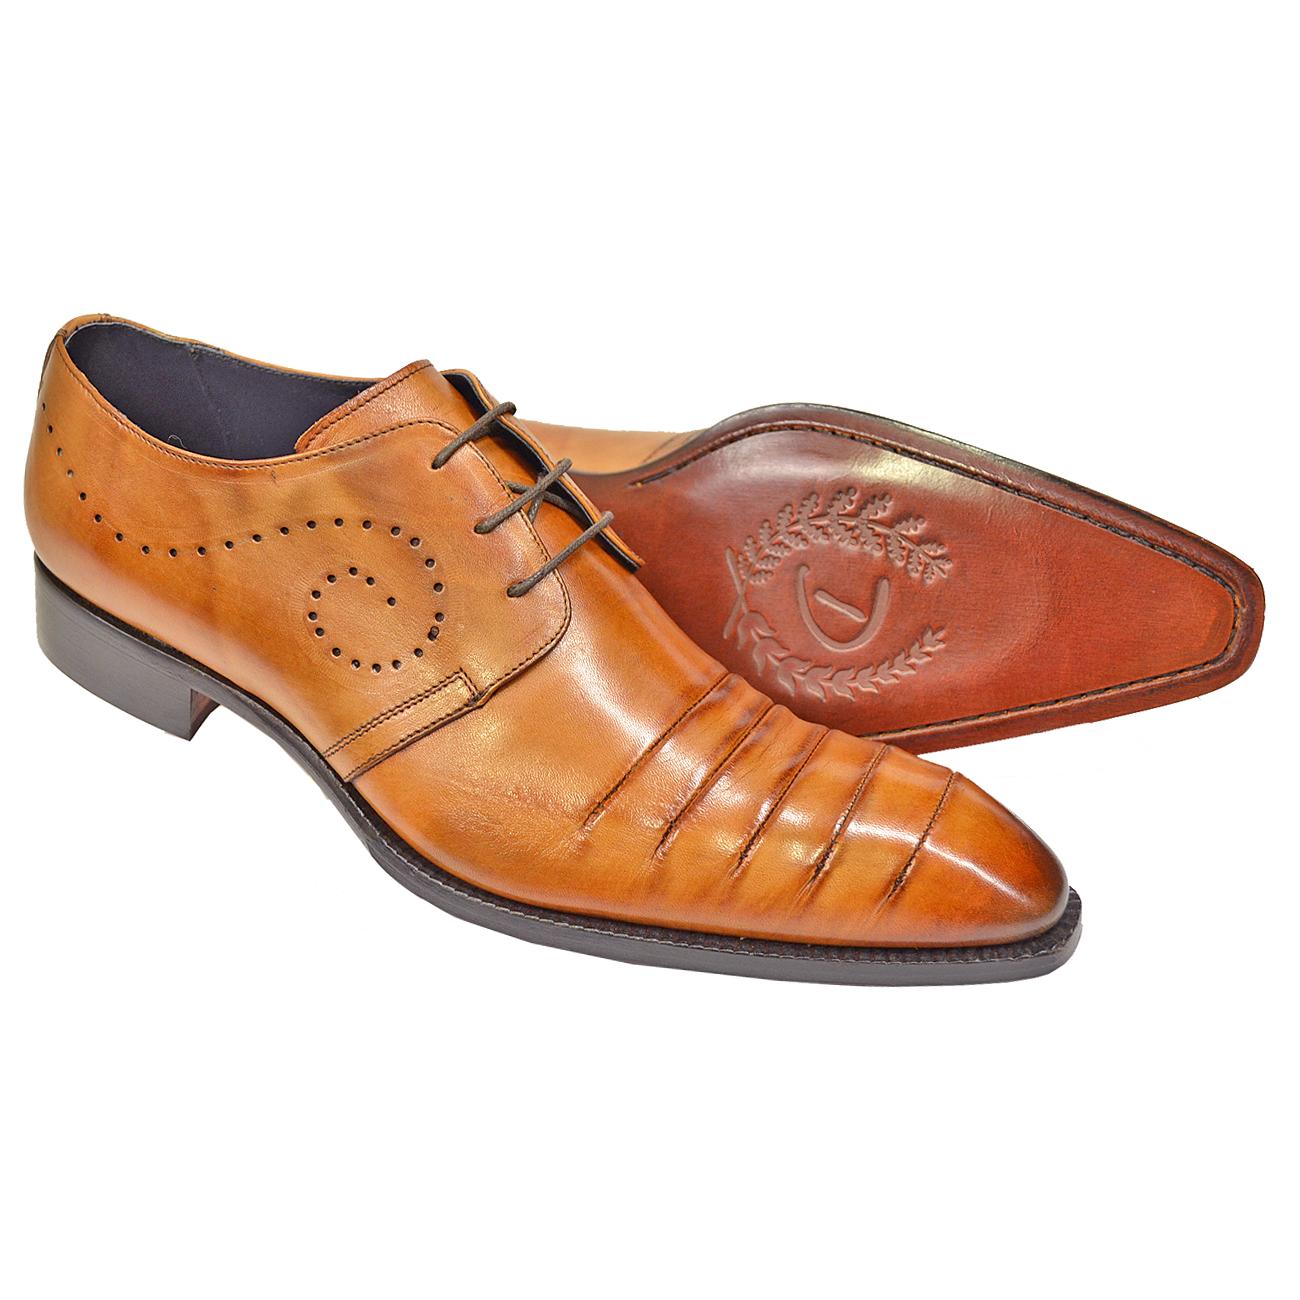 Hand-painted Calfskin Pleated Toe Lace-Up Shoes | Duca Pesaro